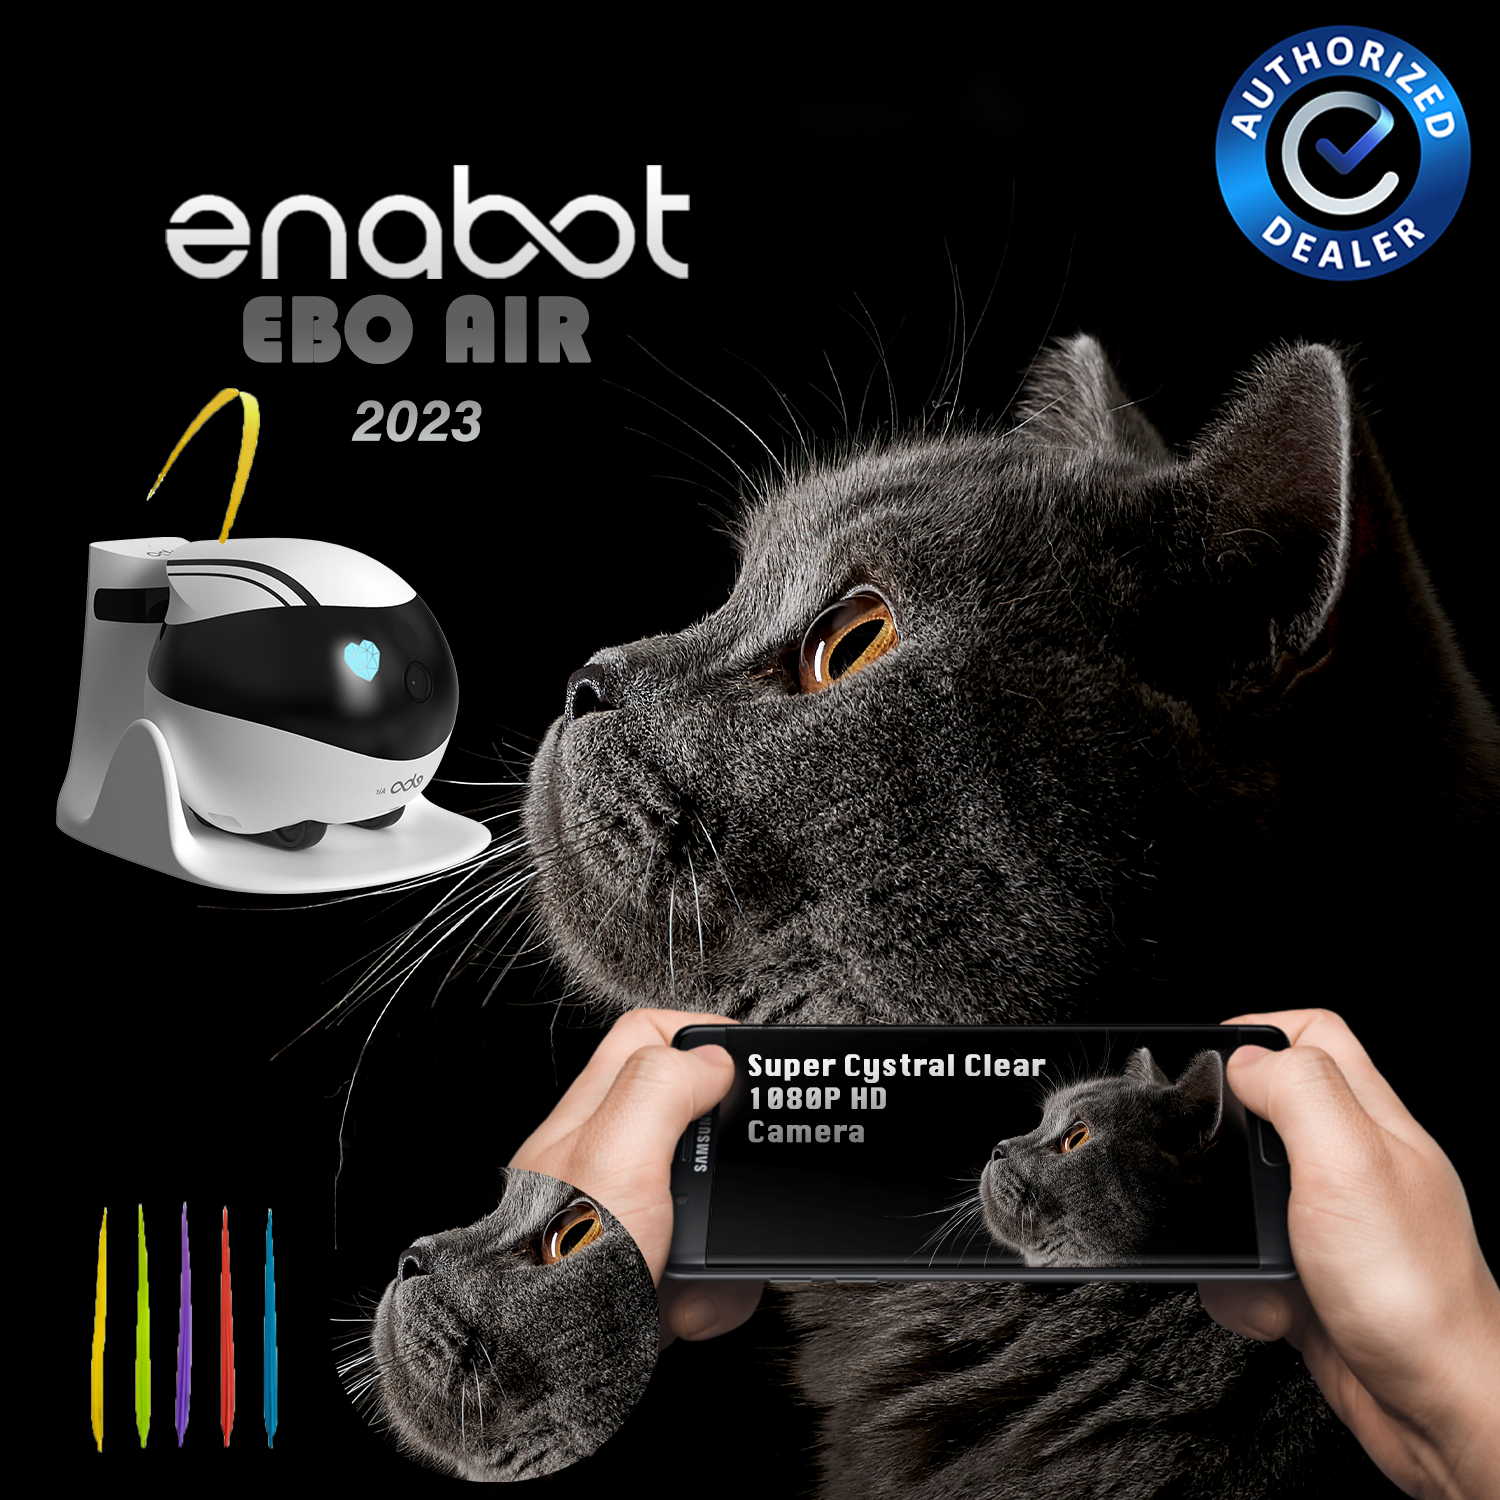 The Enabot Ebo Air – will this robot enhance your life? – The Irish Times